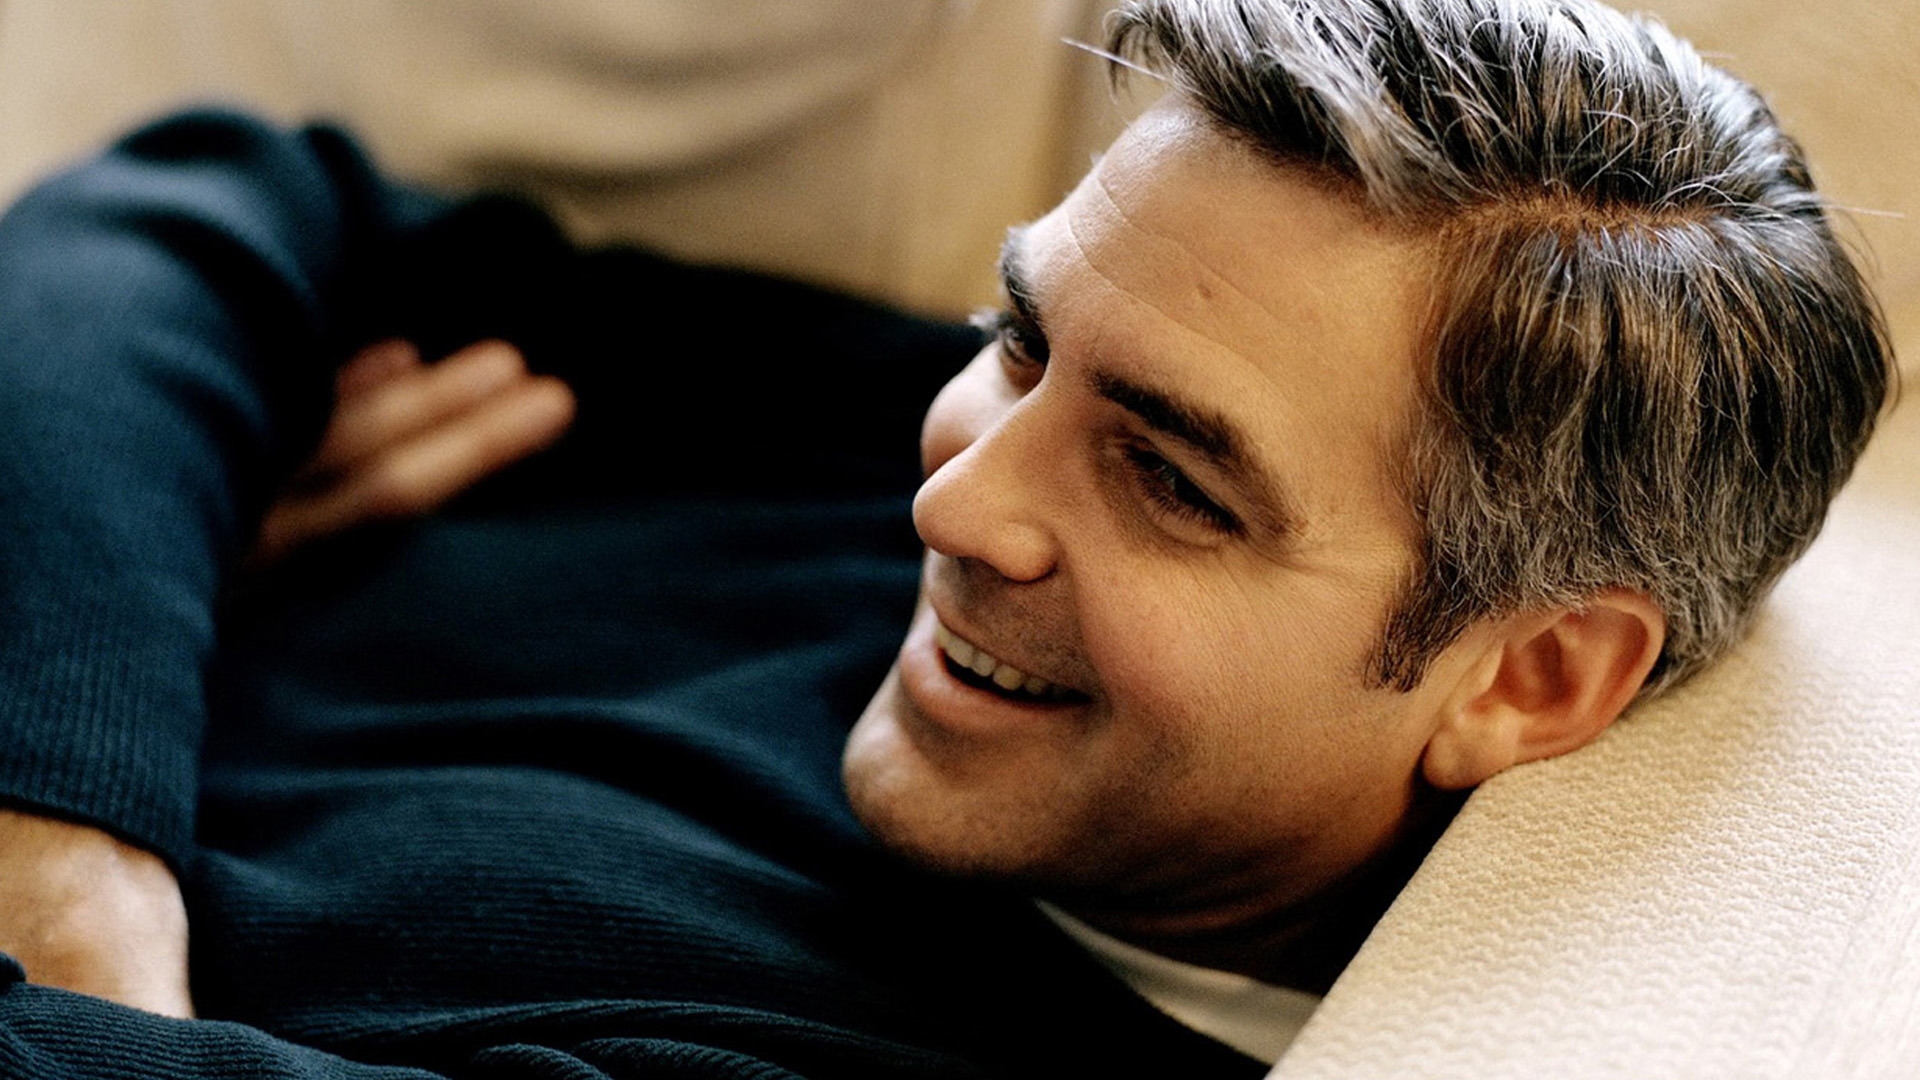 George Clooney Smiling for 1920 x 1080 HDTV 1080p resolution